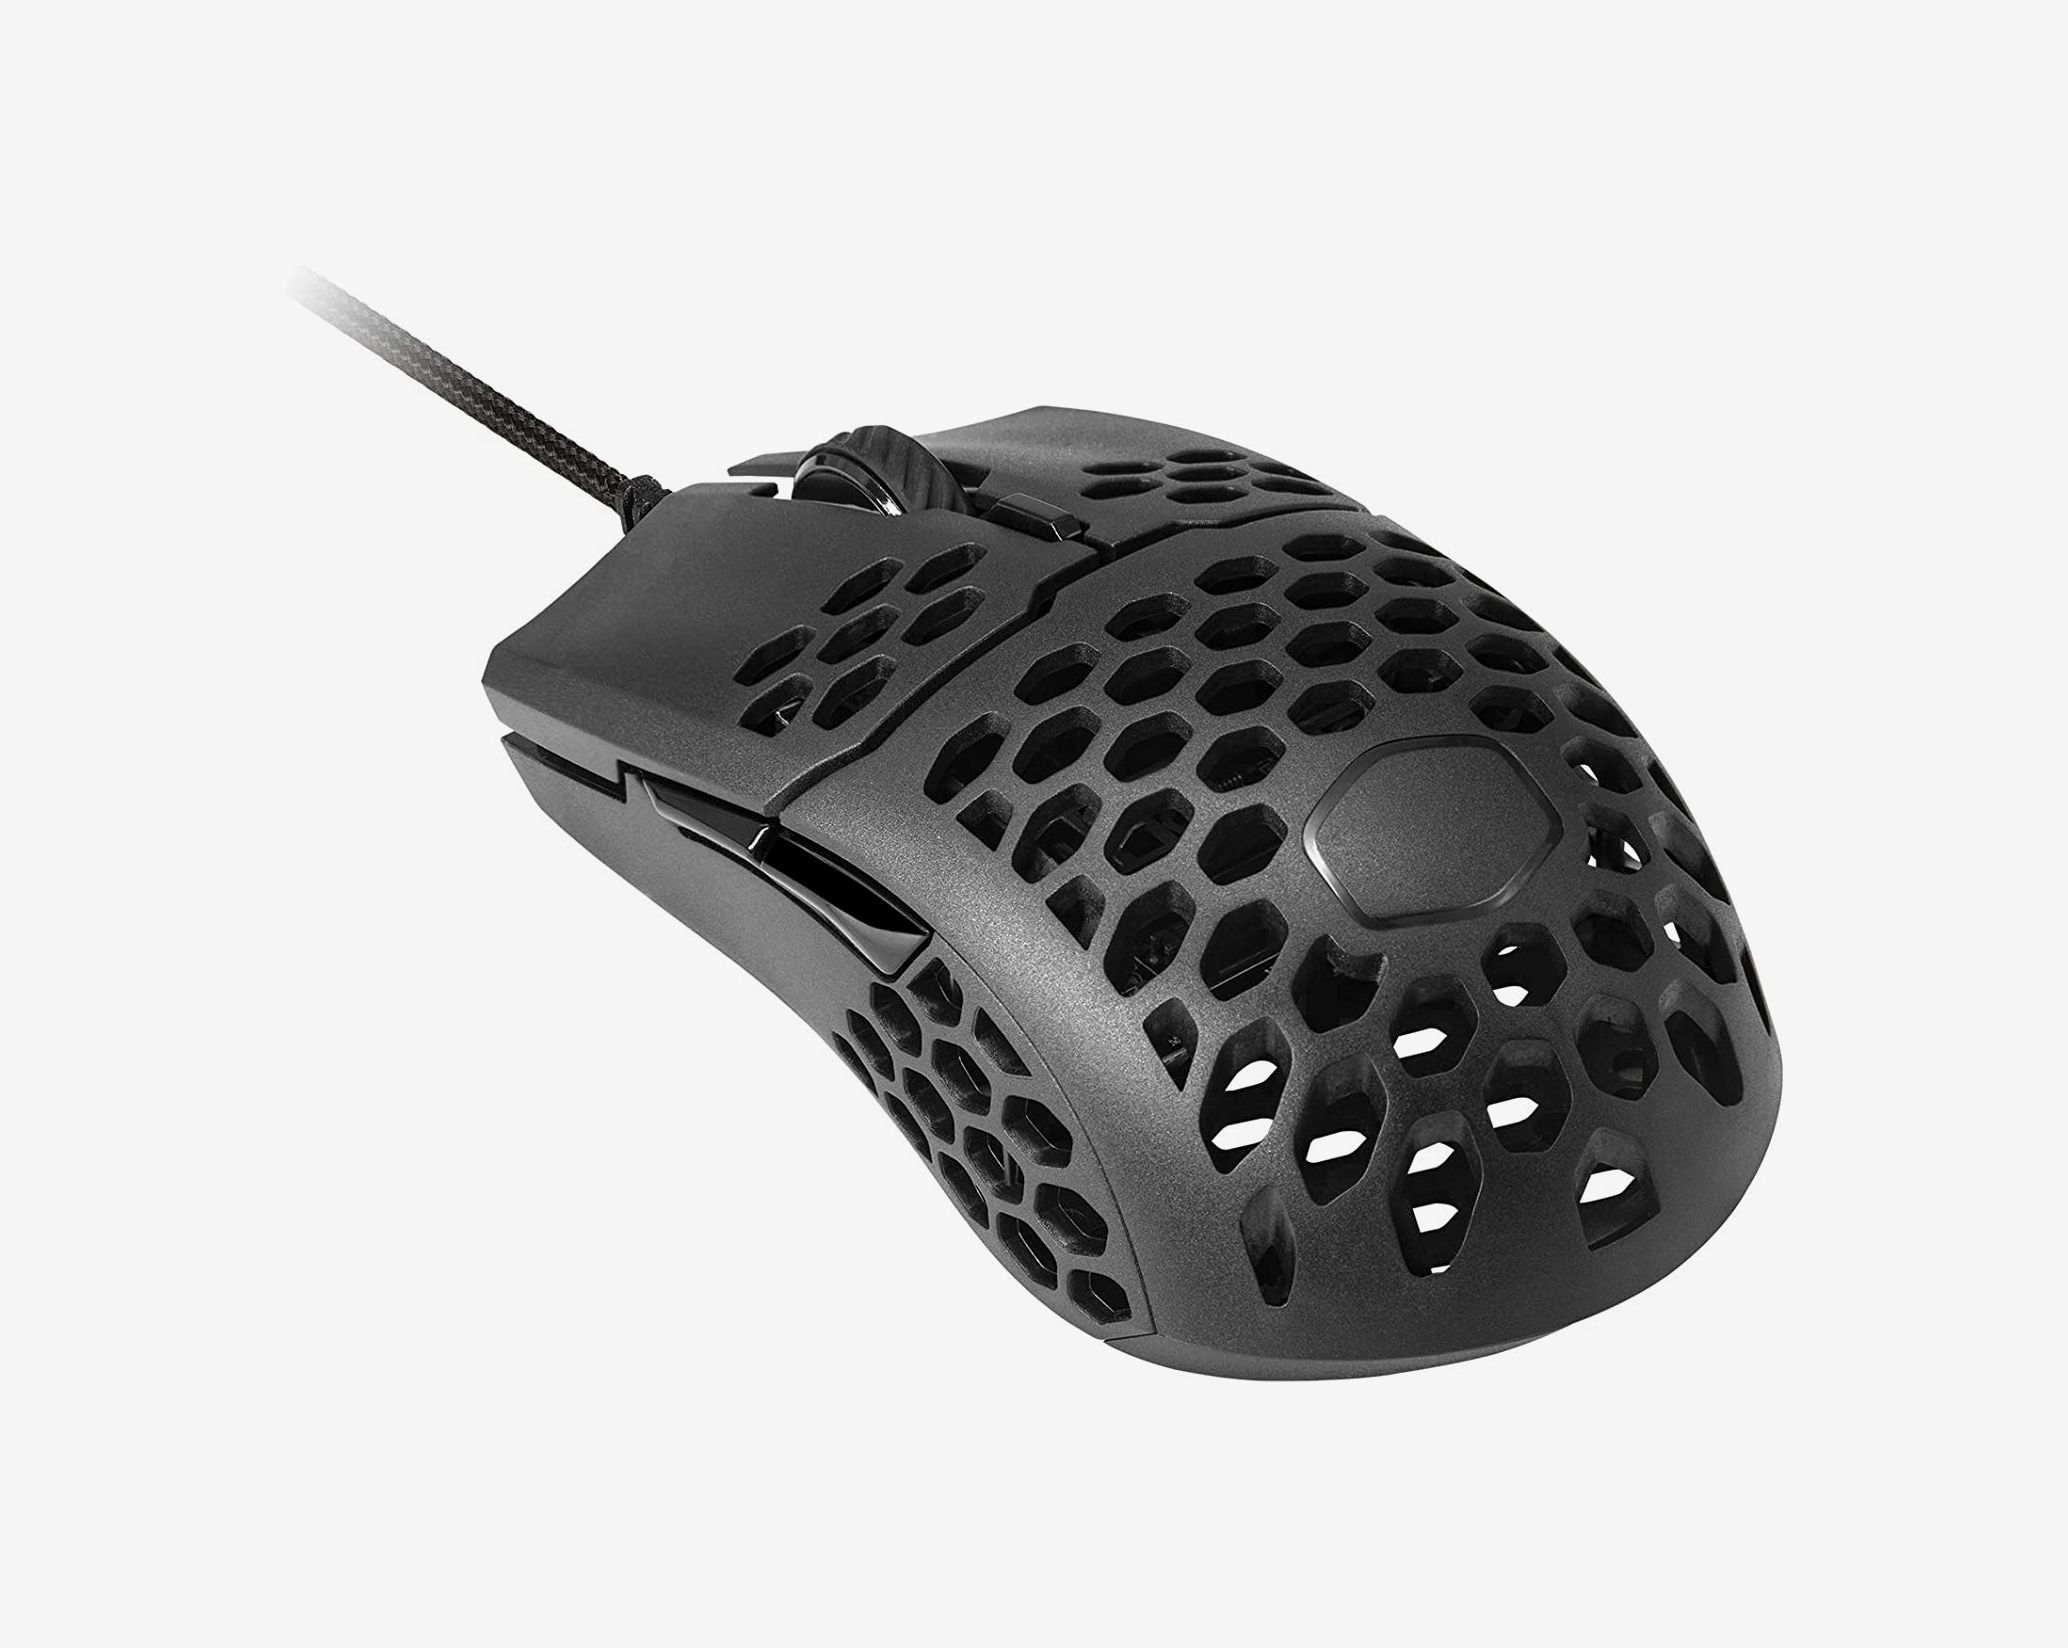 which is the best gaming mouse